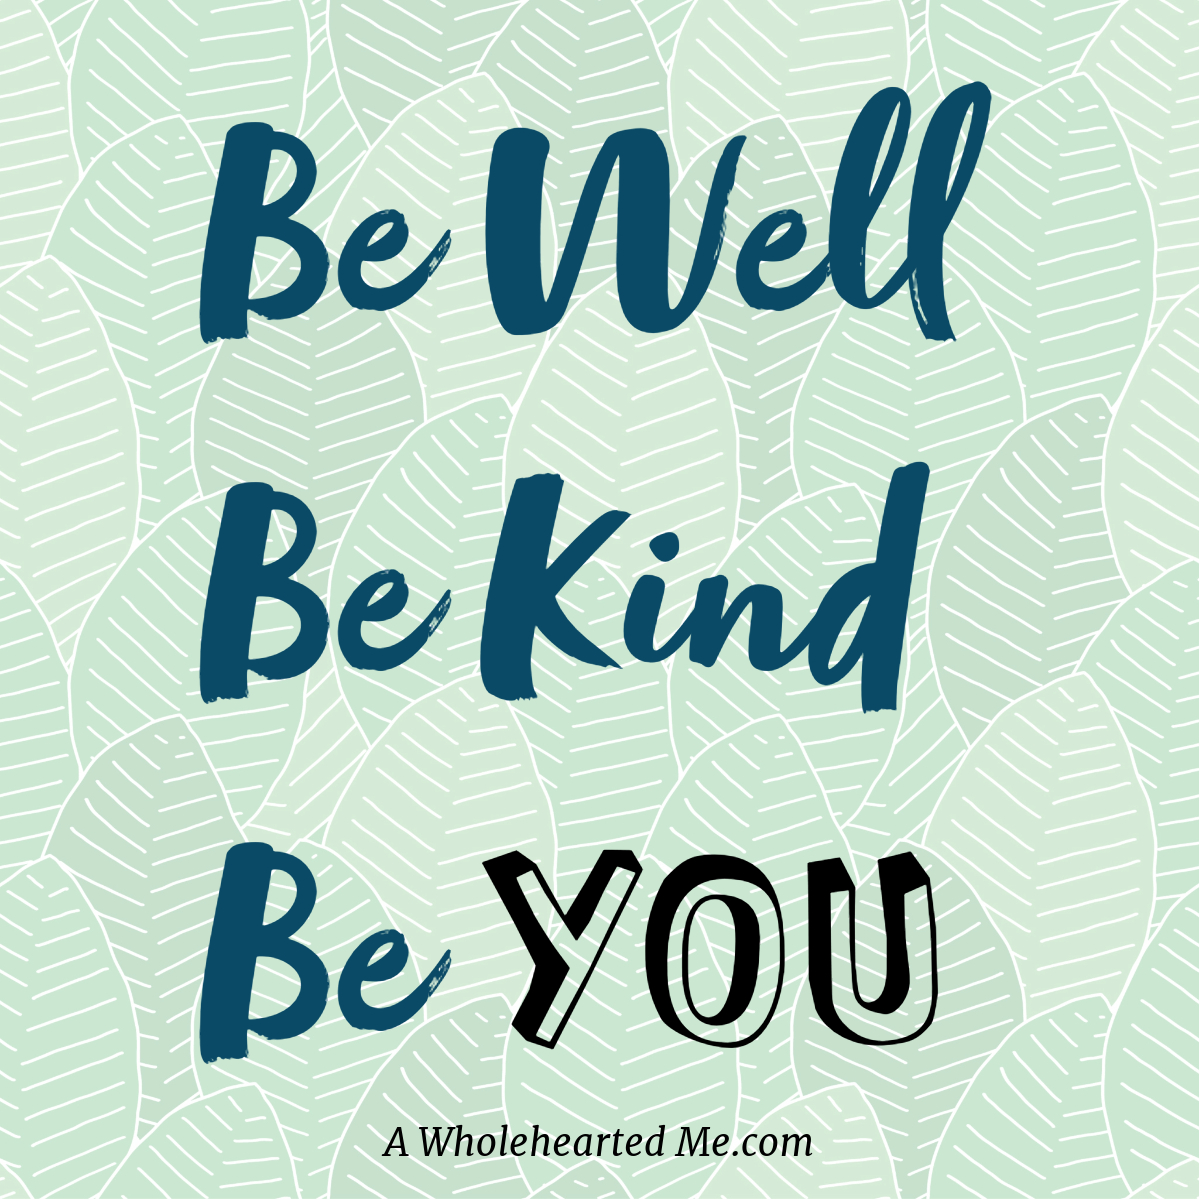 Be Well

Be Kind

Be You!

#LiveInTheNow #LiveInTheMoment #PersonalGrowth #LiveWithPurpose